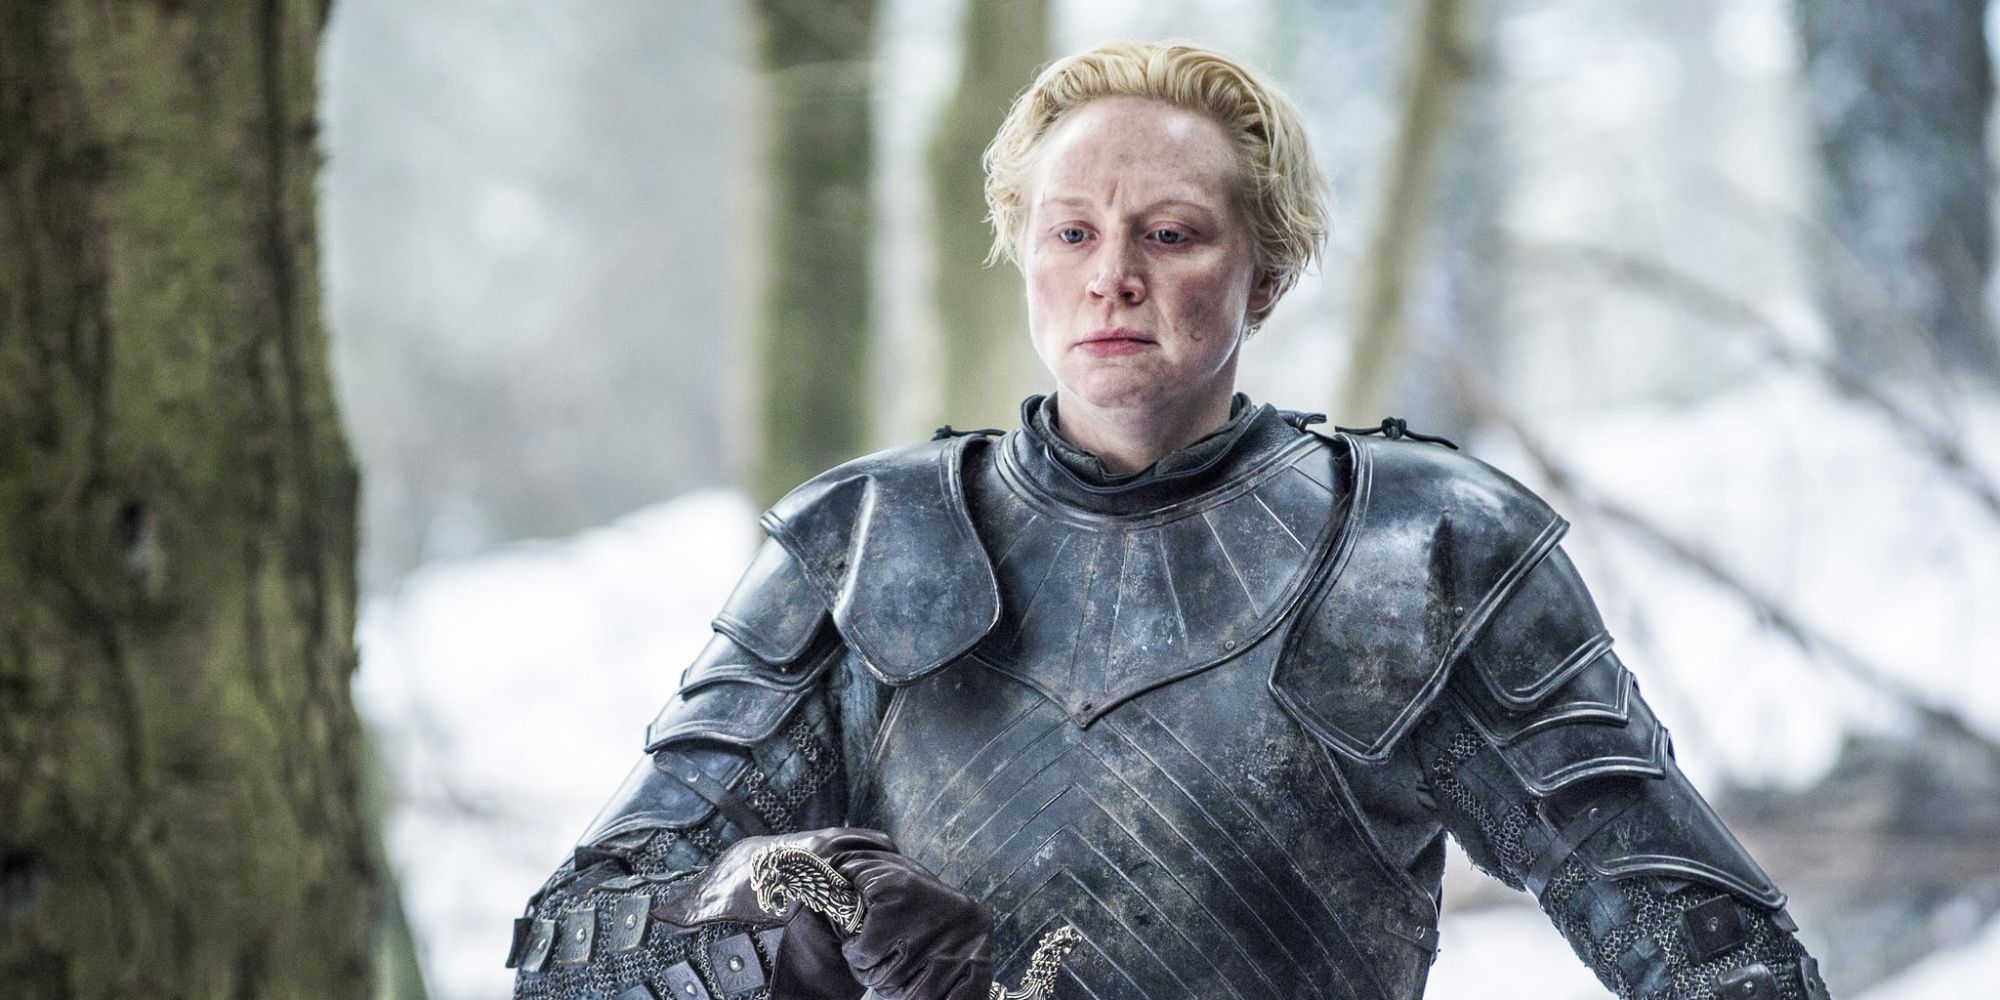 Game of Thrones' Brienne of Tarth (Gwendoline Christie) wearing her armor in the forest